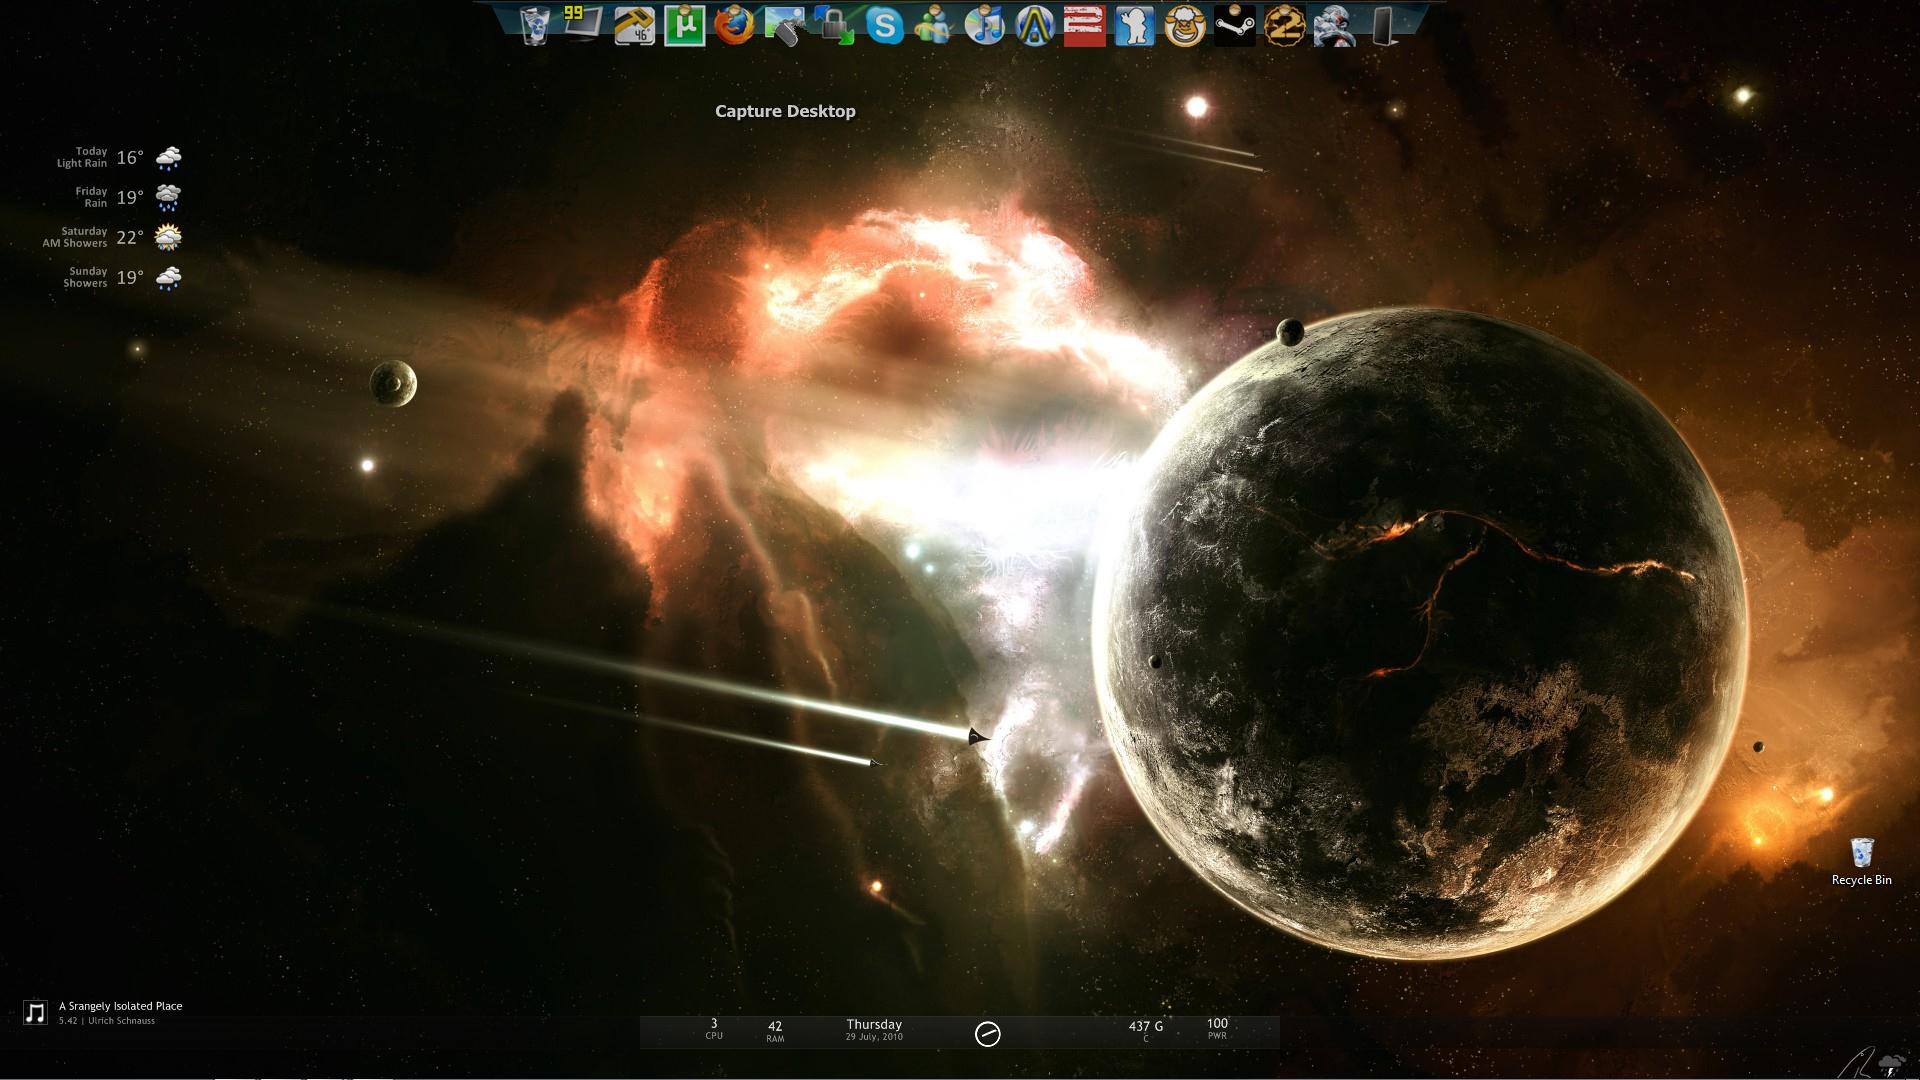 Fellow Pc Gamers Post Your Wallpapers ( No 56kb) - PC/Mac/Linux ...